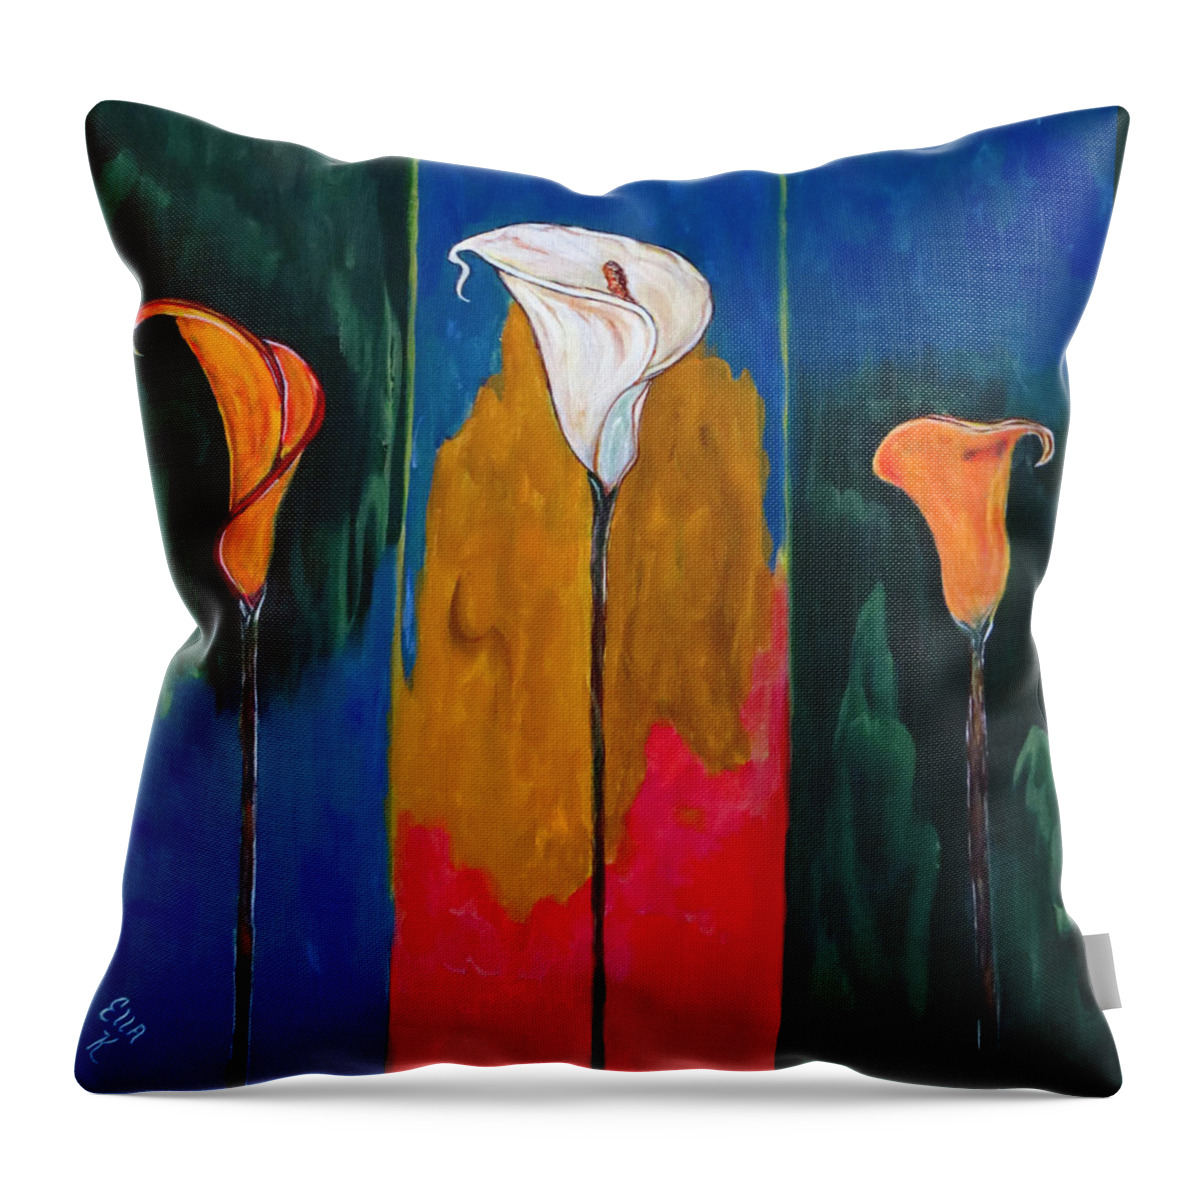 Three Lilies Throw Pillow featuring the painting Triplets - Triptych Painting Original by Ella Kaye Dickey